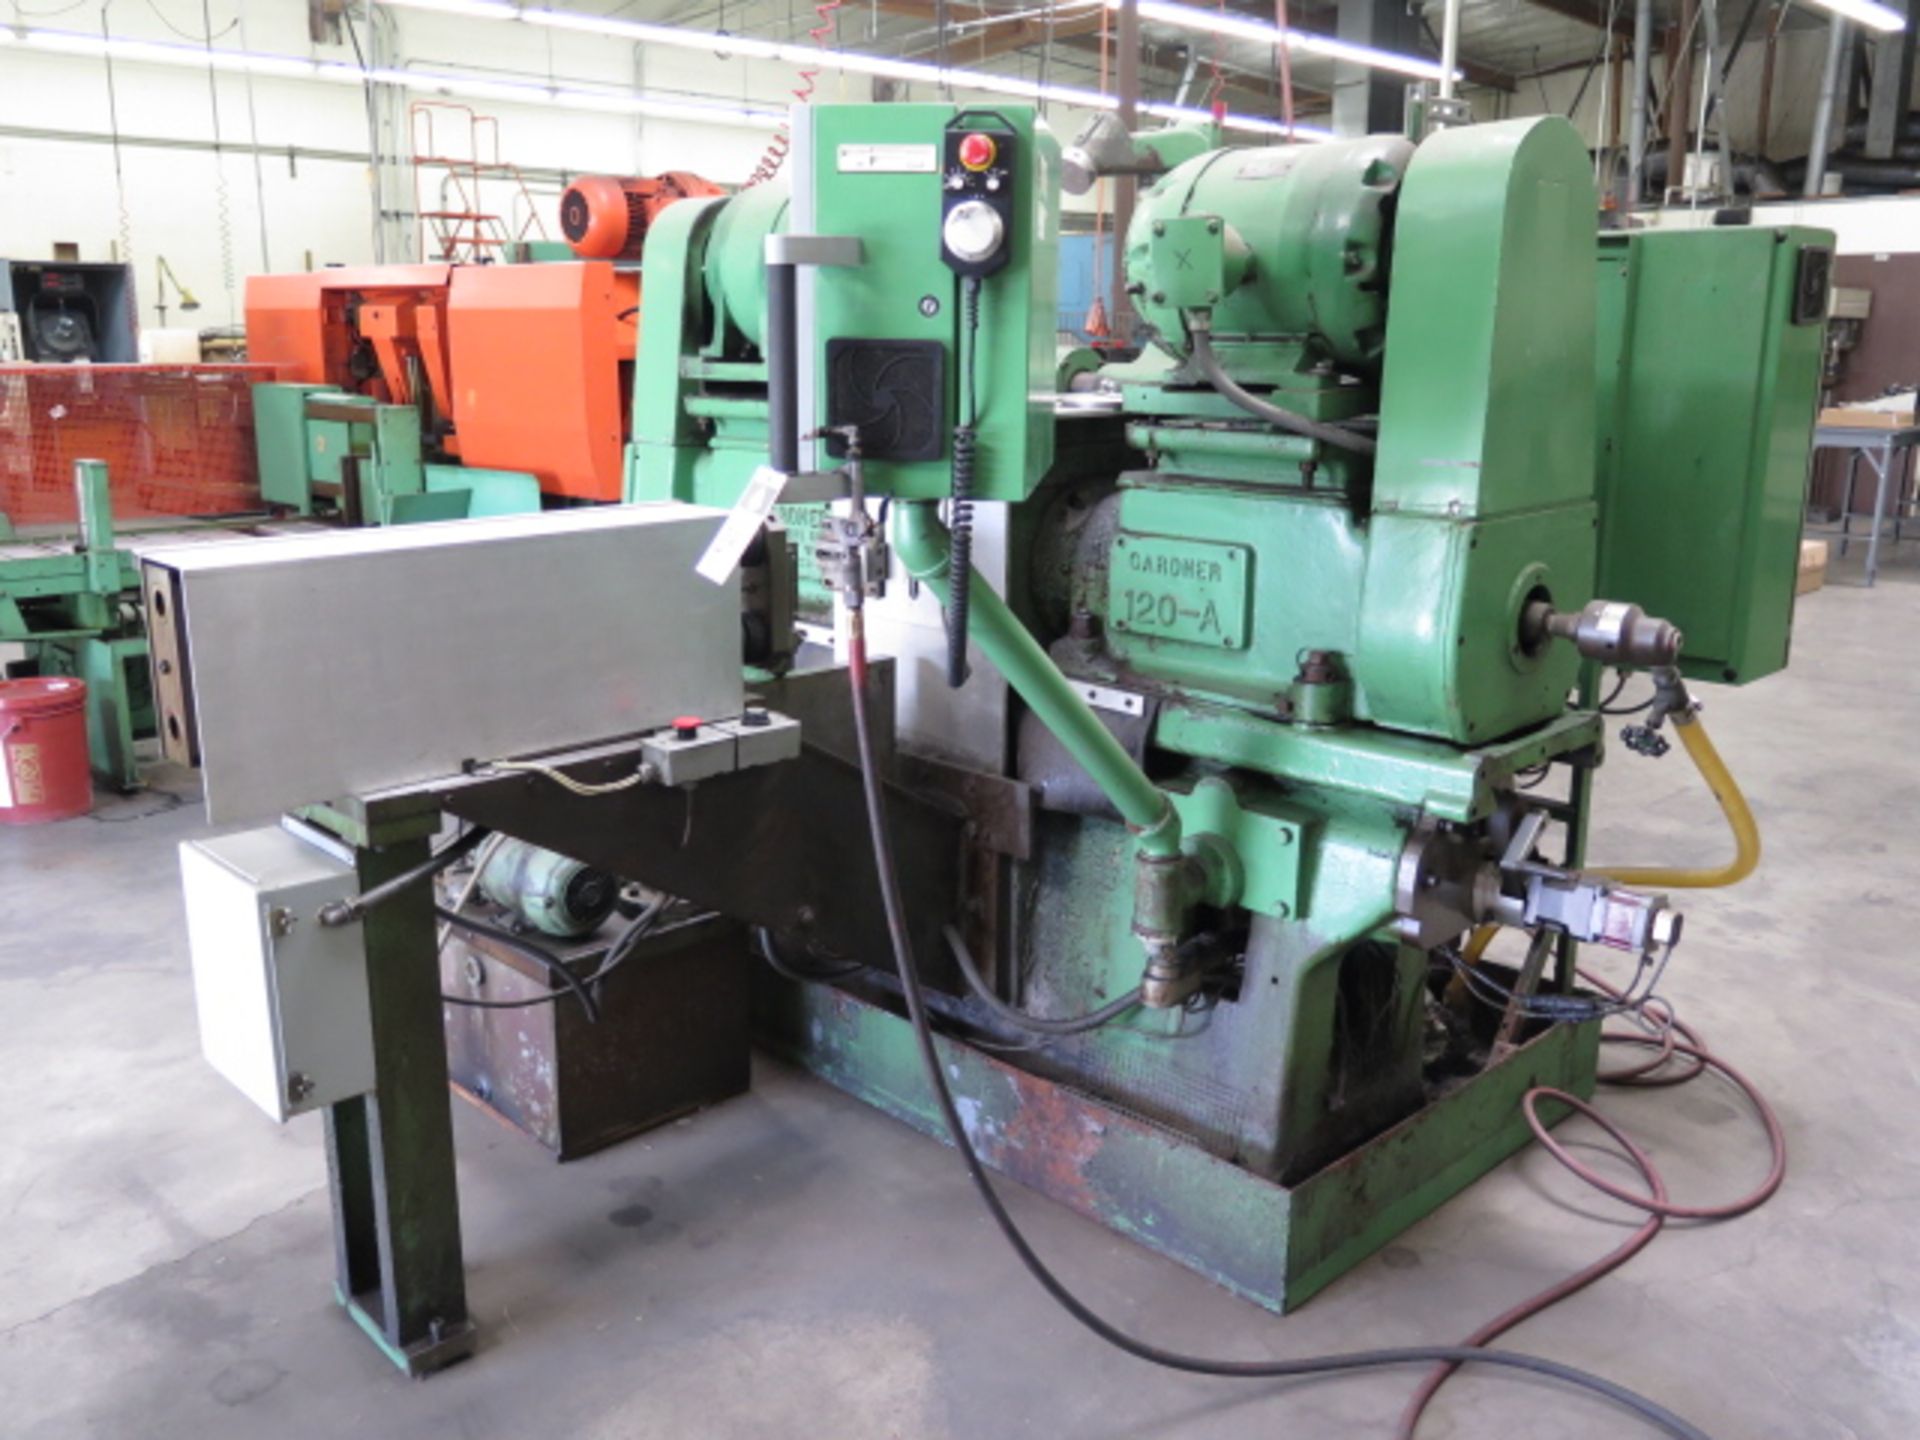 Gardner mdl. 120-A CNC Double-Disc Grinder w/ PC-Based Controls, Hand Wheel Controller, DC Feed - Image 2 of 8